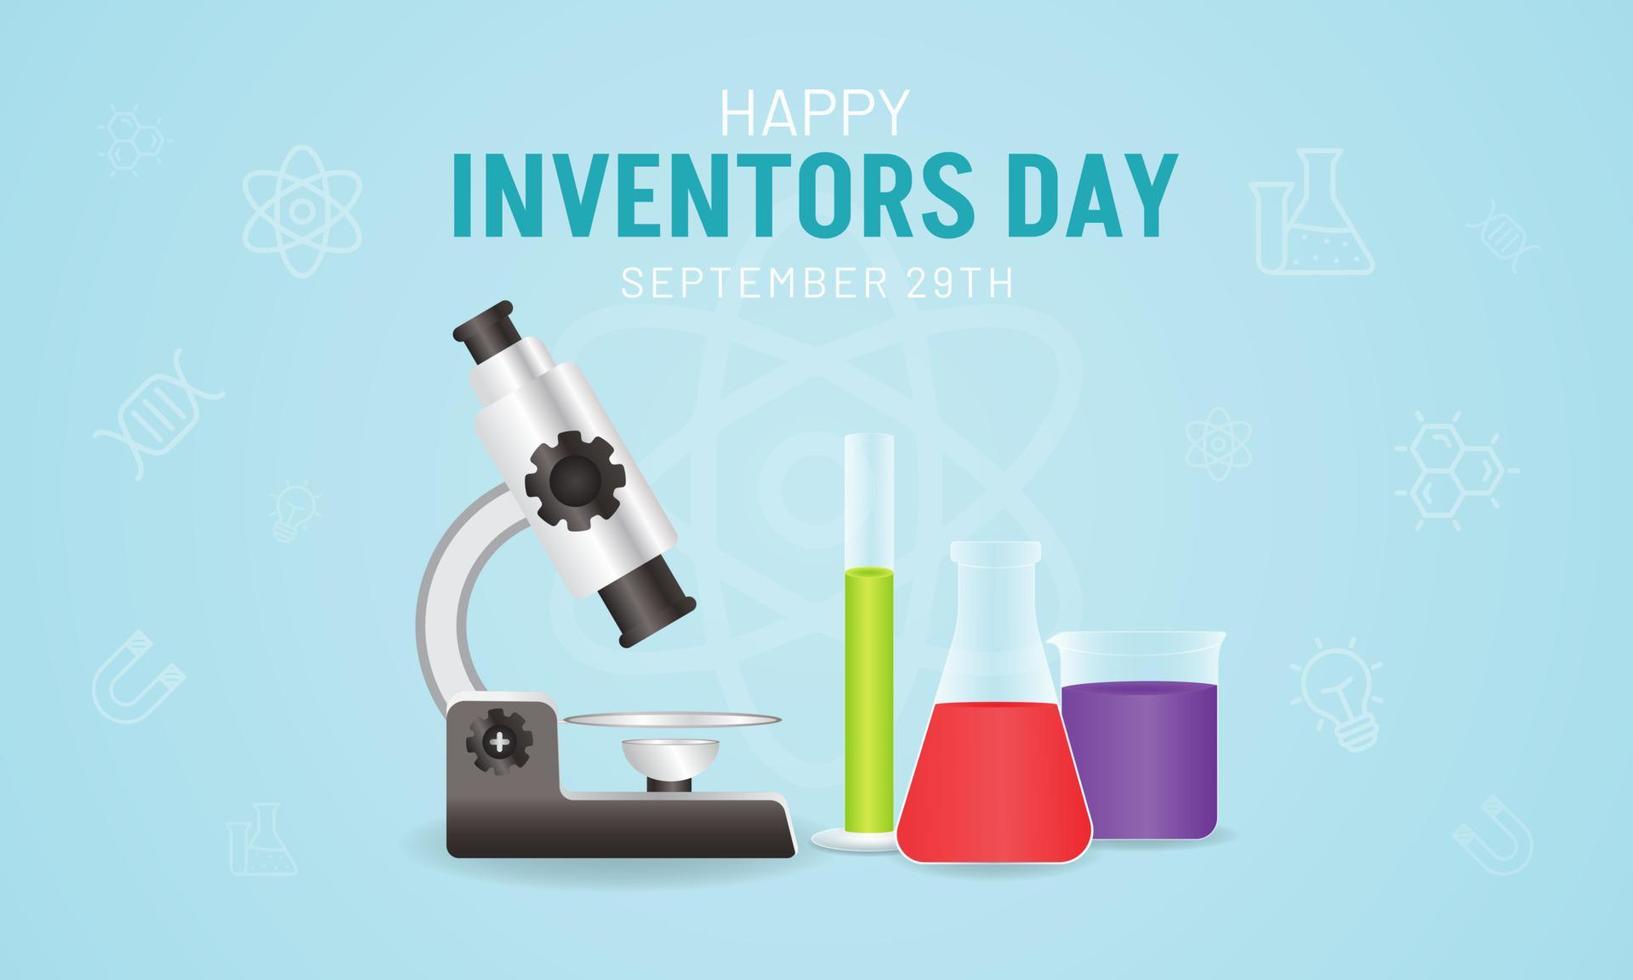 Happy Inventors Day September 29th with laboratory equipments illustration on isolated background vector